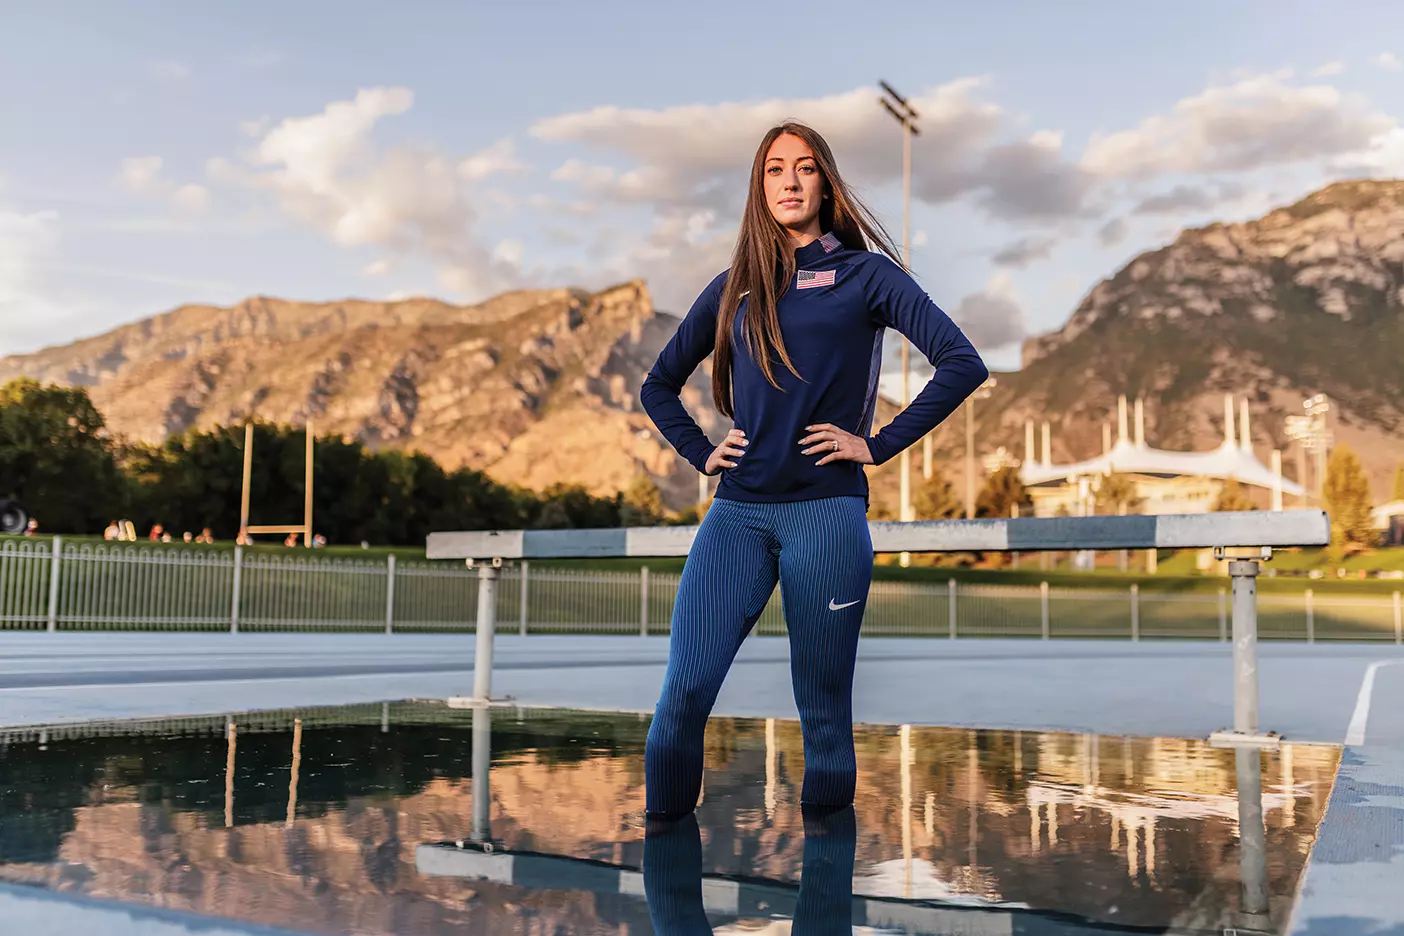 Former BYU track star Courtney Wayment stands in the water of a steeplechase hurdle pit.